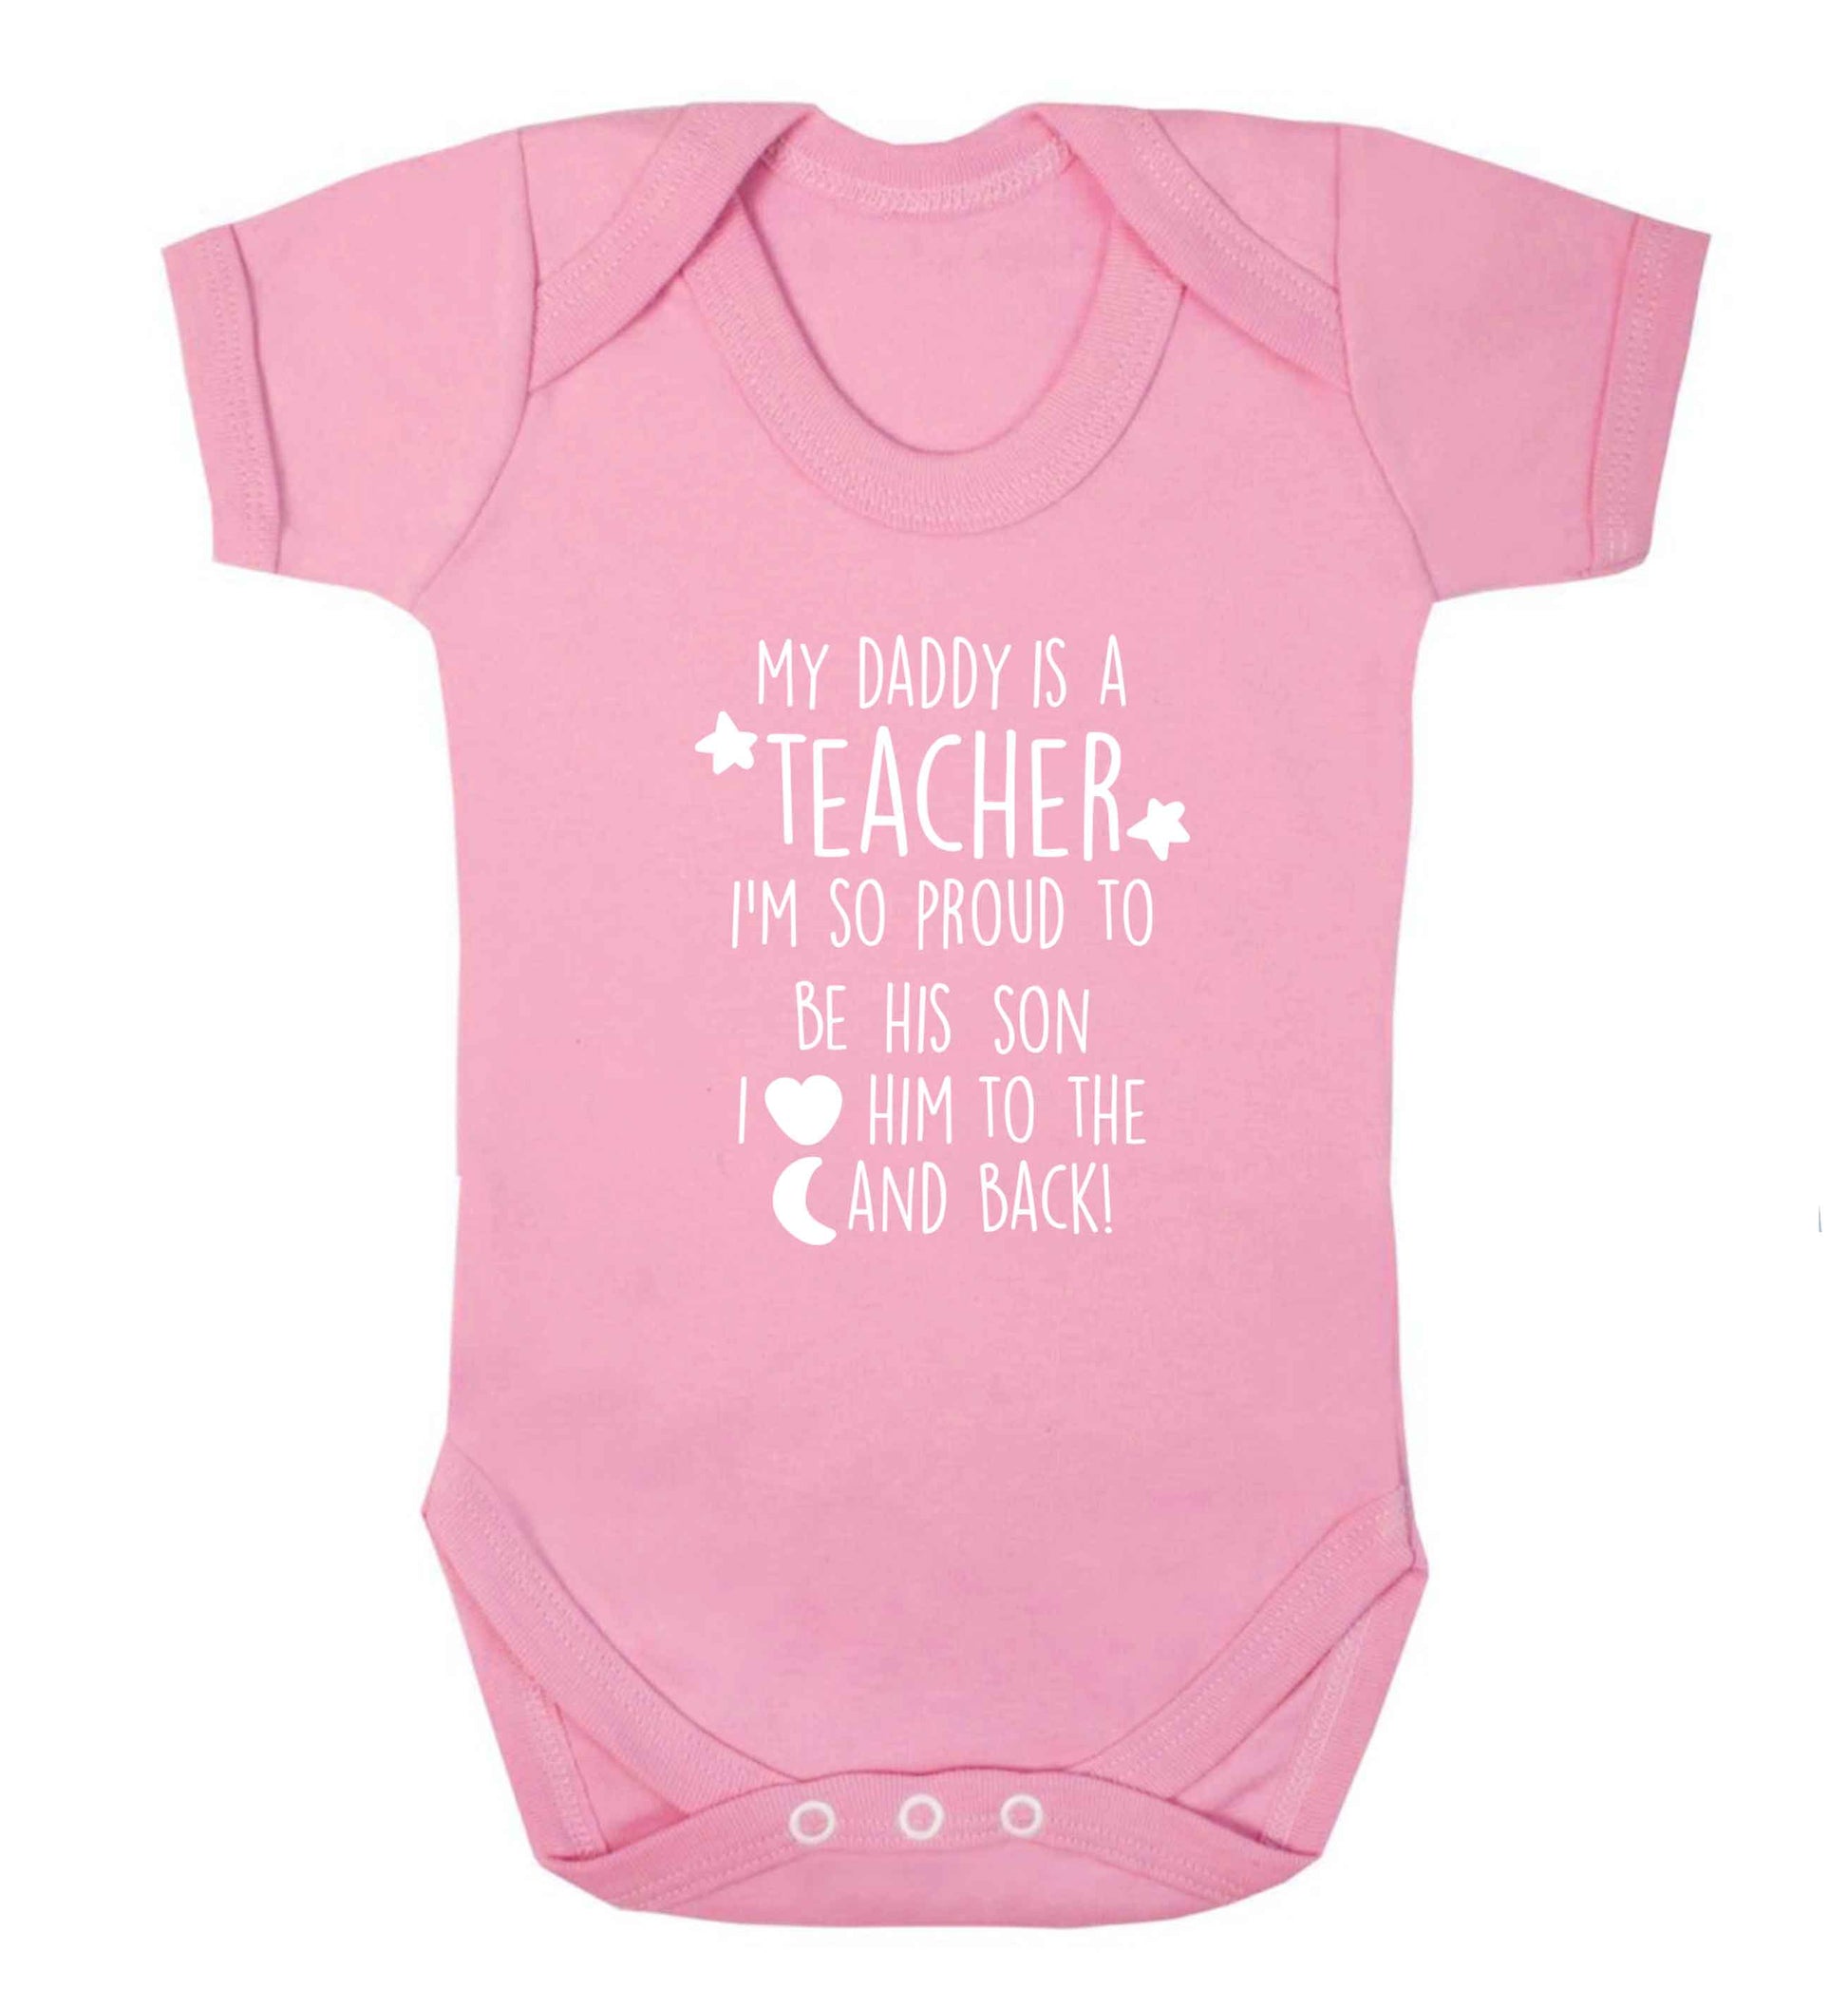 My daddy is a teacher I'm so proud to be his son I love her to the moon and back baby vest pale pink 18-24 months